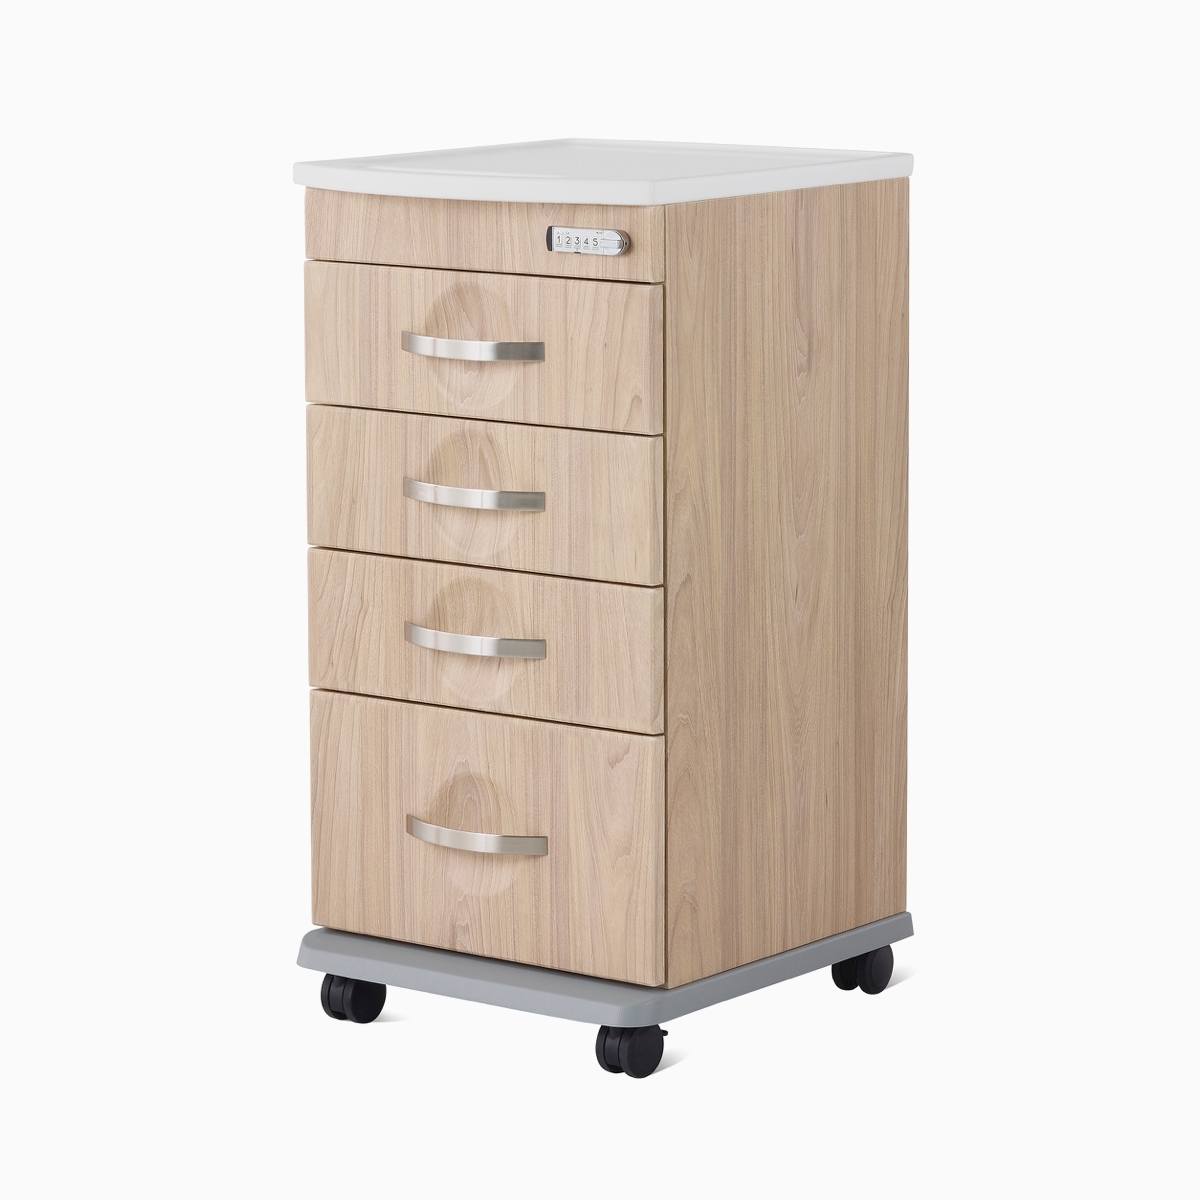 A Compass casework 4-drawer supply cart in a warm elm finish.